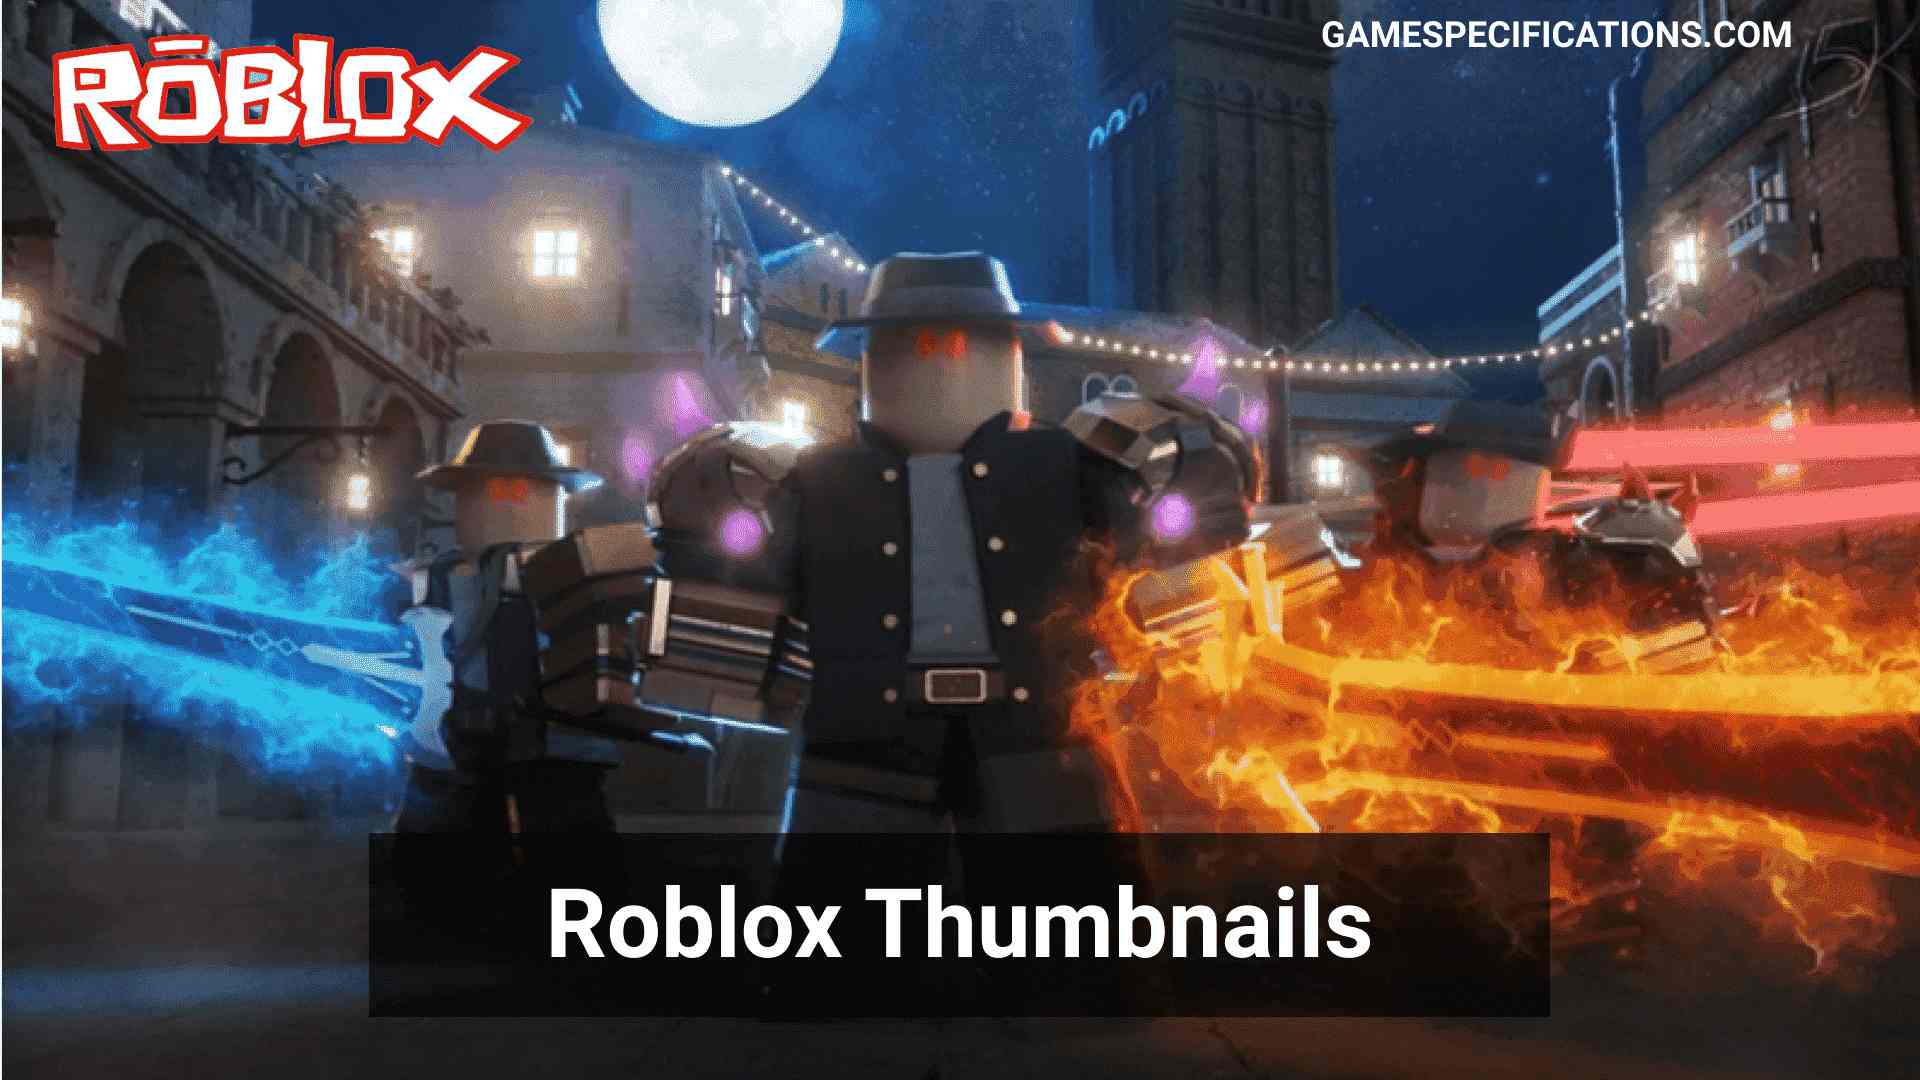 Roblox Thumbnails An Ultimate Guide On Awesome Thumbnails Generation 2021 Game Specifications - how to change the thumbnail of your roblox game